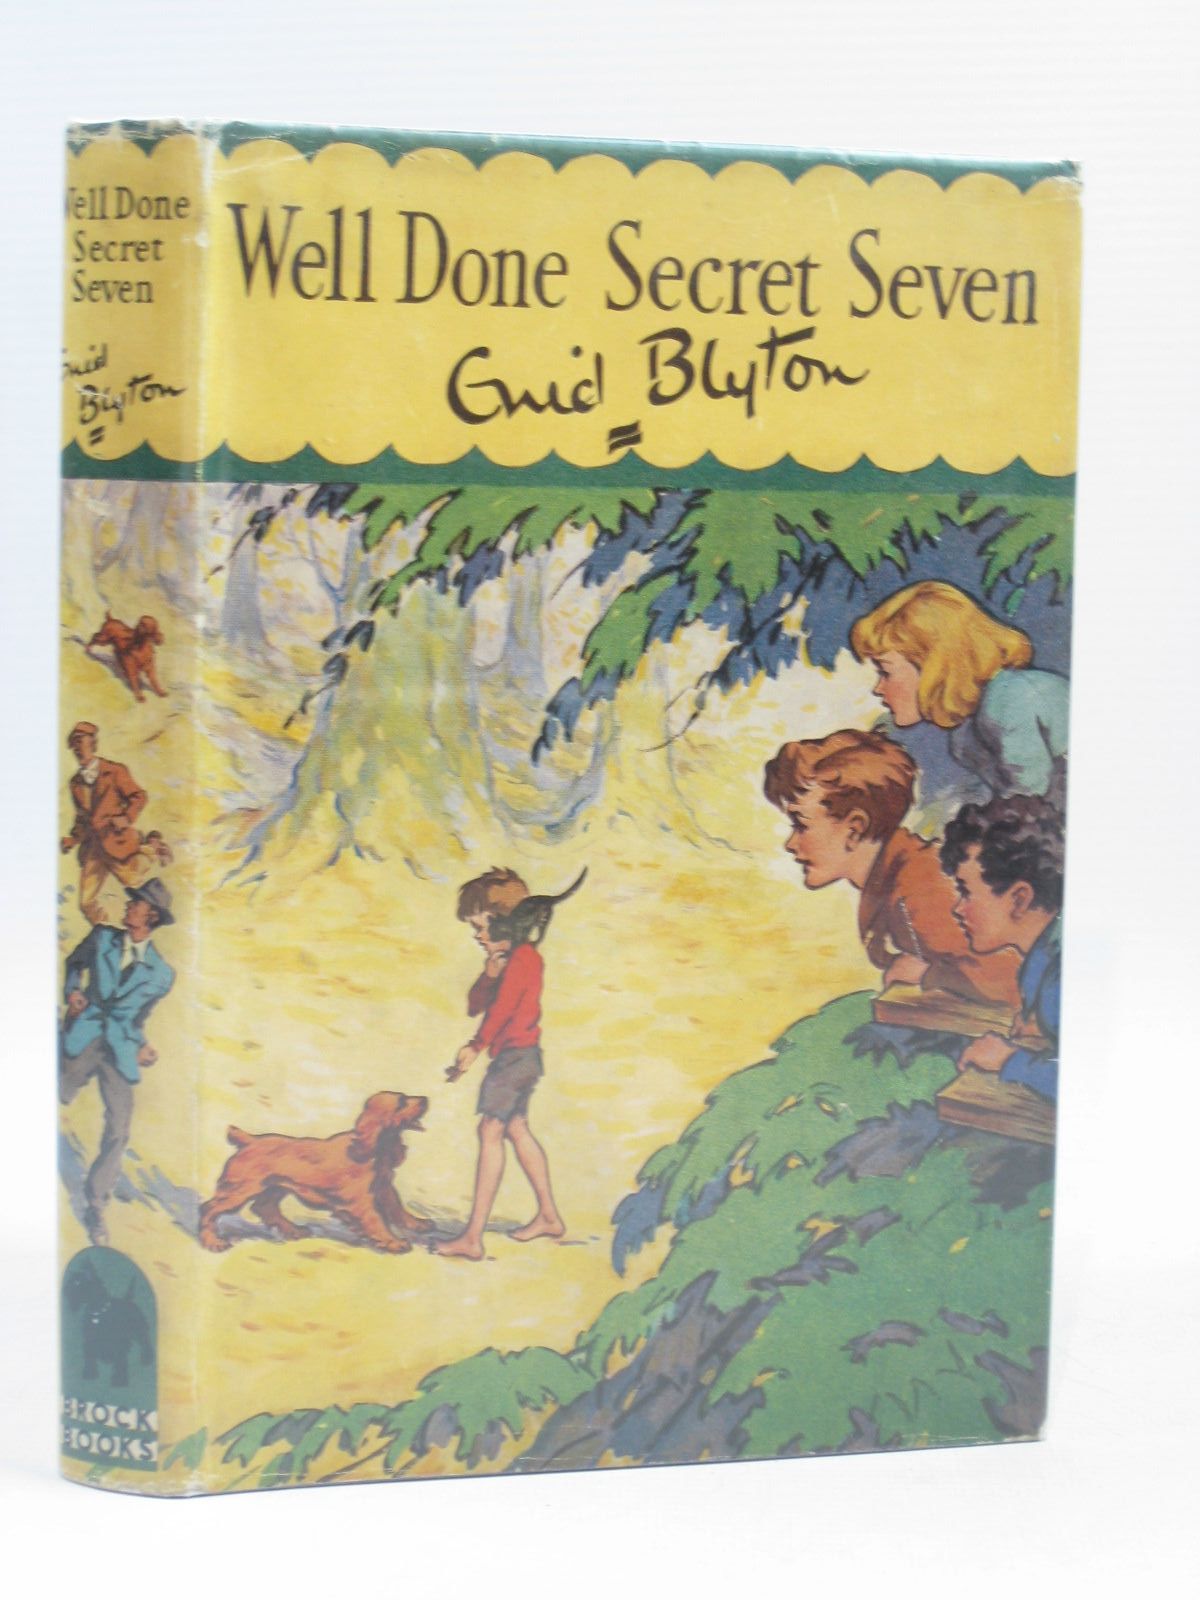 Cover of WELL DONE SECRET SEVEN by Enid Blyton